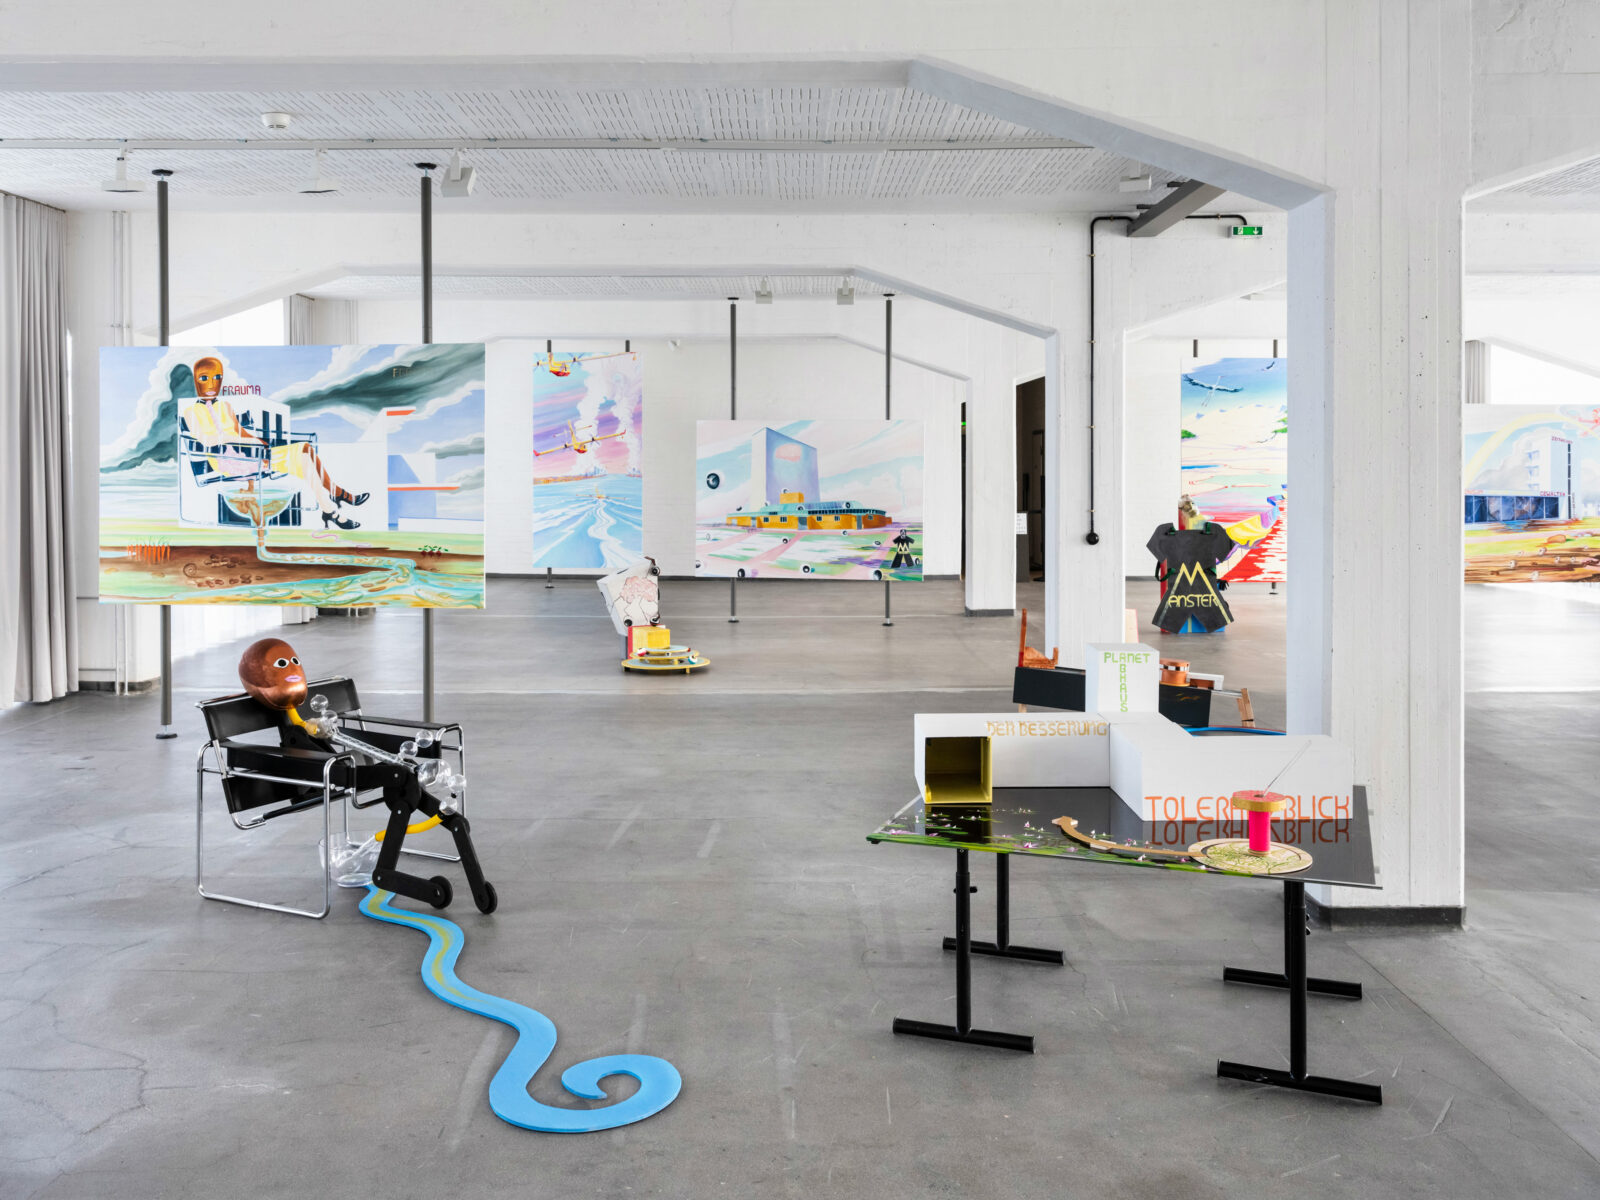 View of the large, bright workshop room in the Bauhaus building. Large pictures are mounted on supports in the room. There are a few models on the floor.